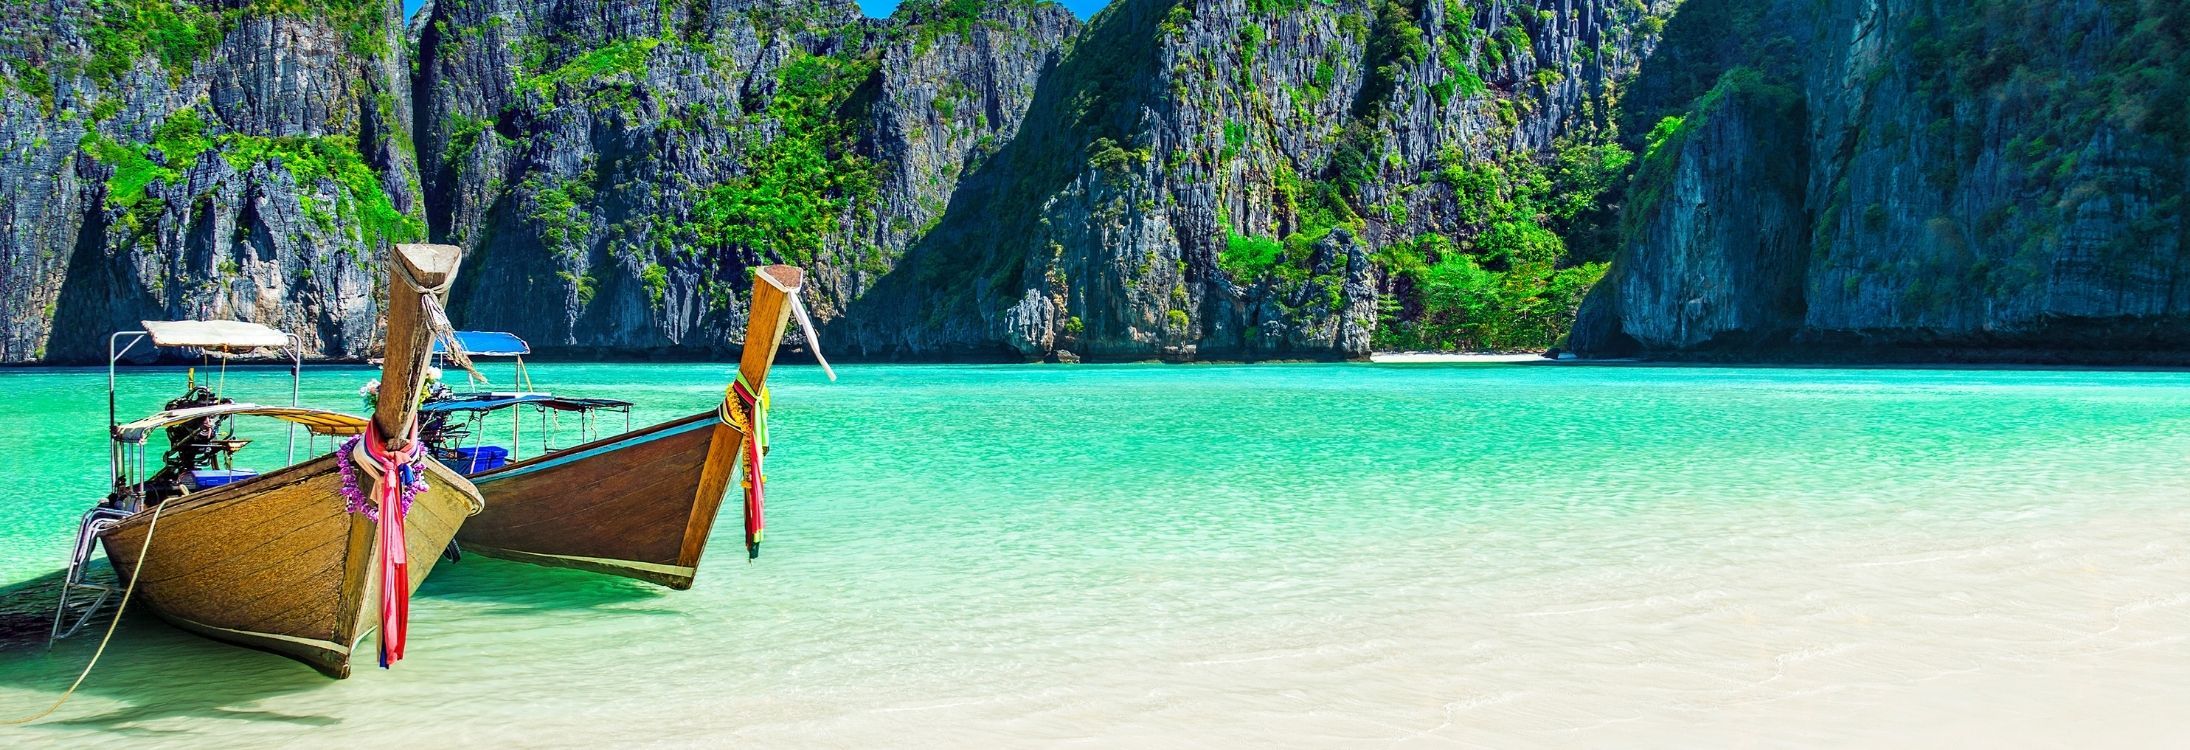 9 things to keep in mind while in Thailand - Horizontal Thumbnail